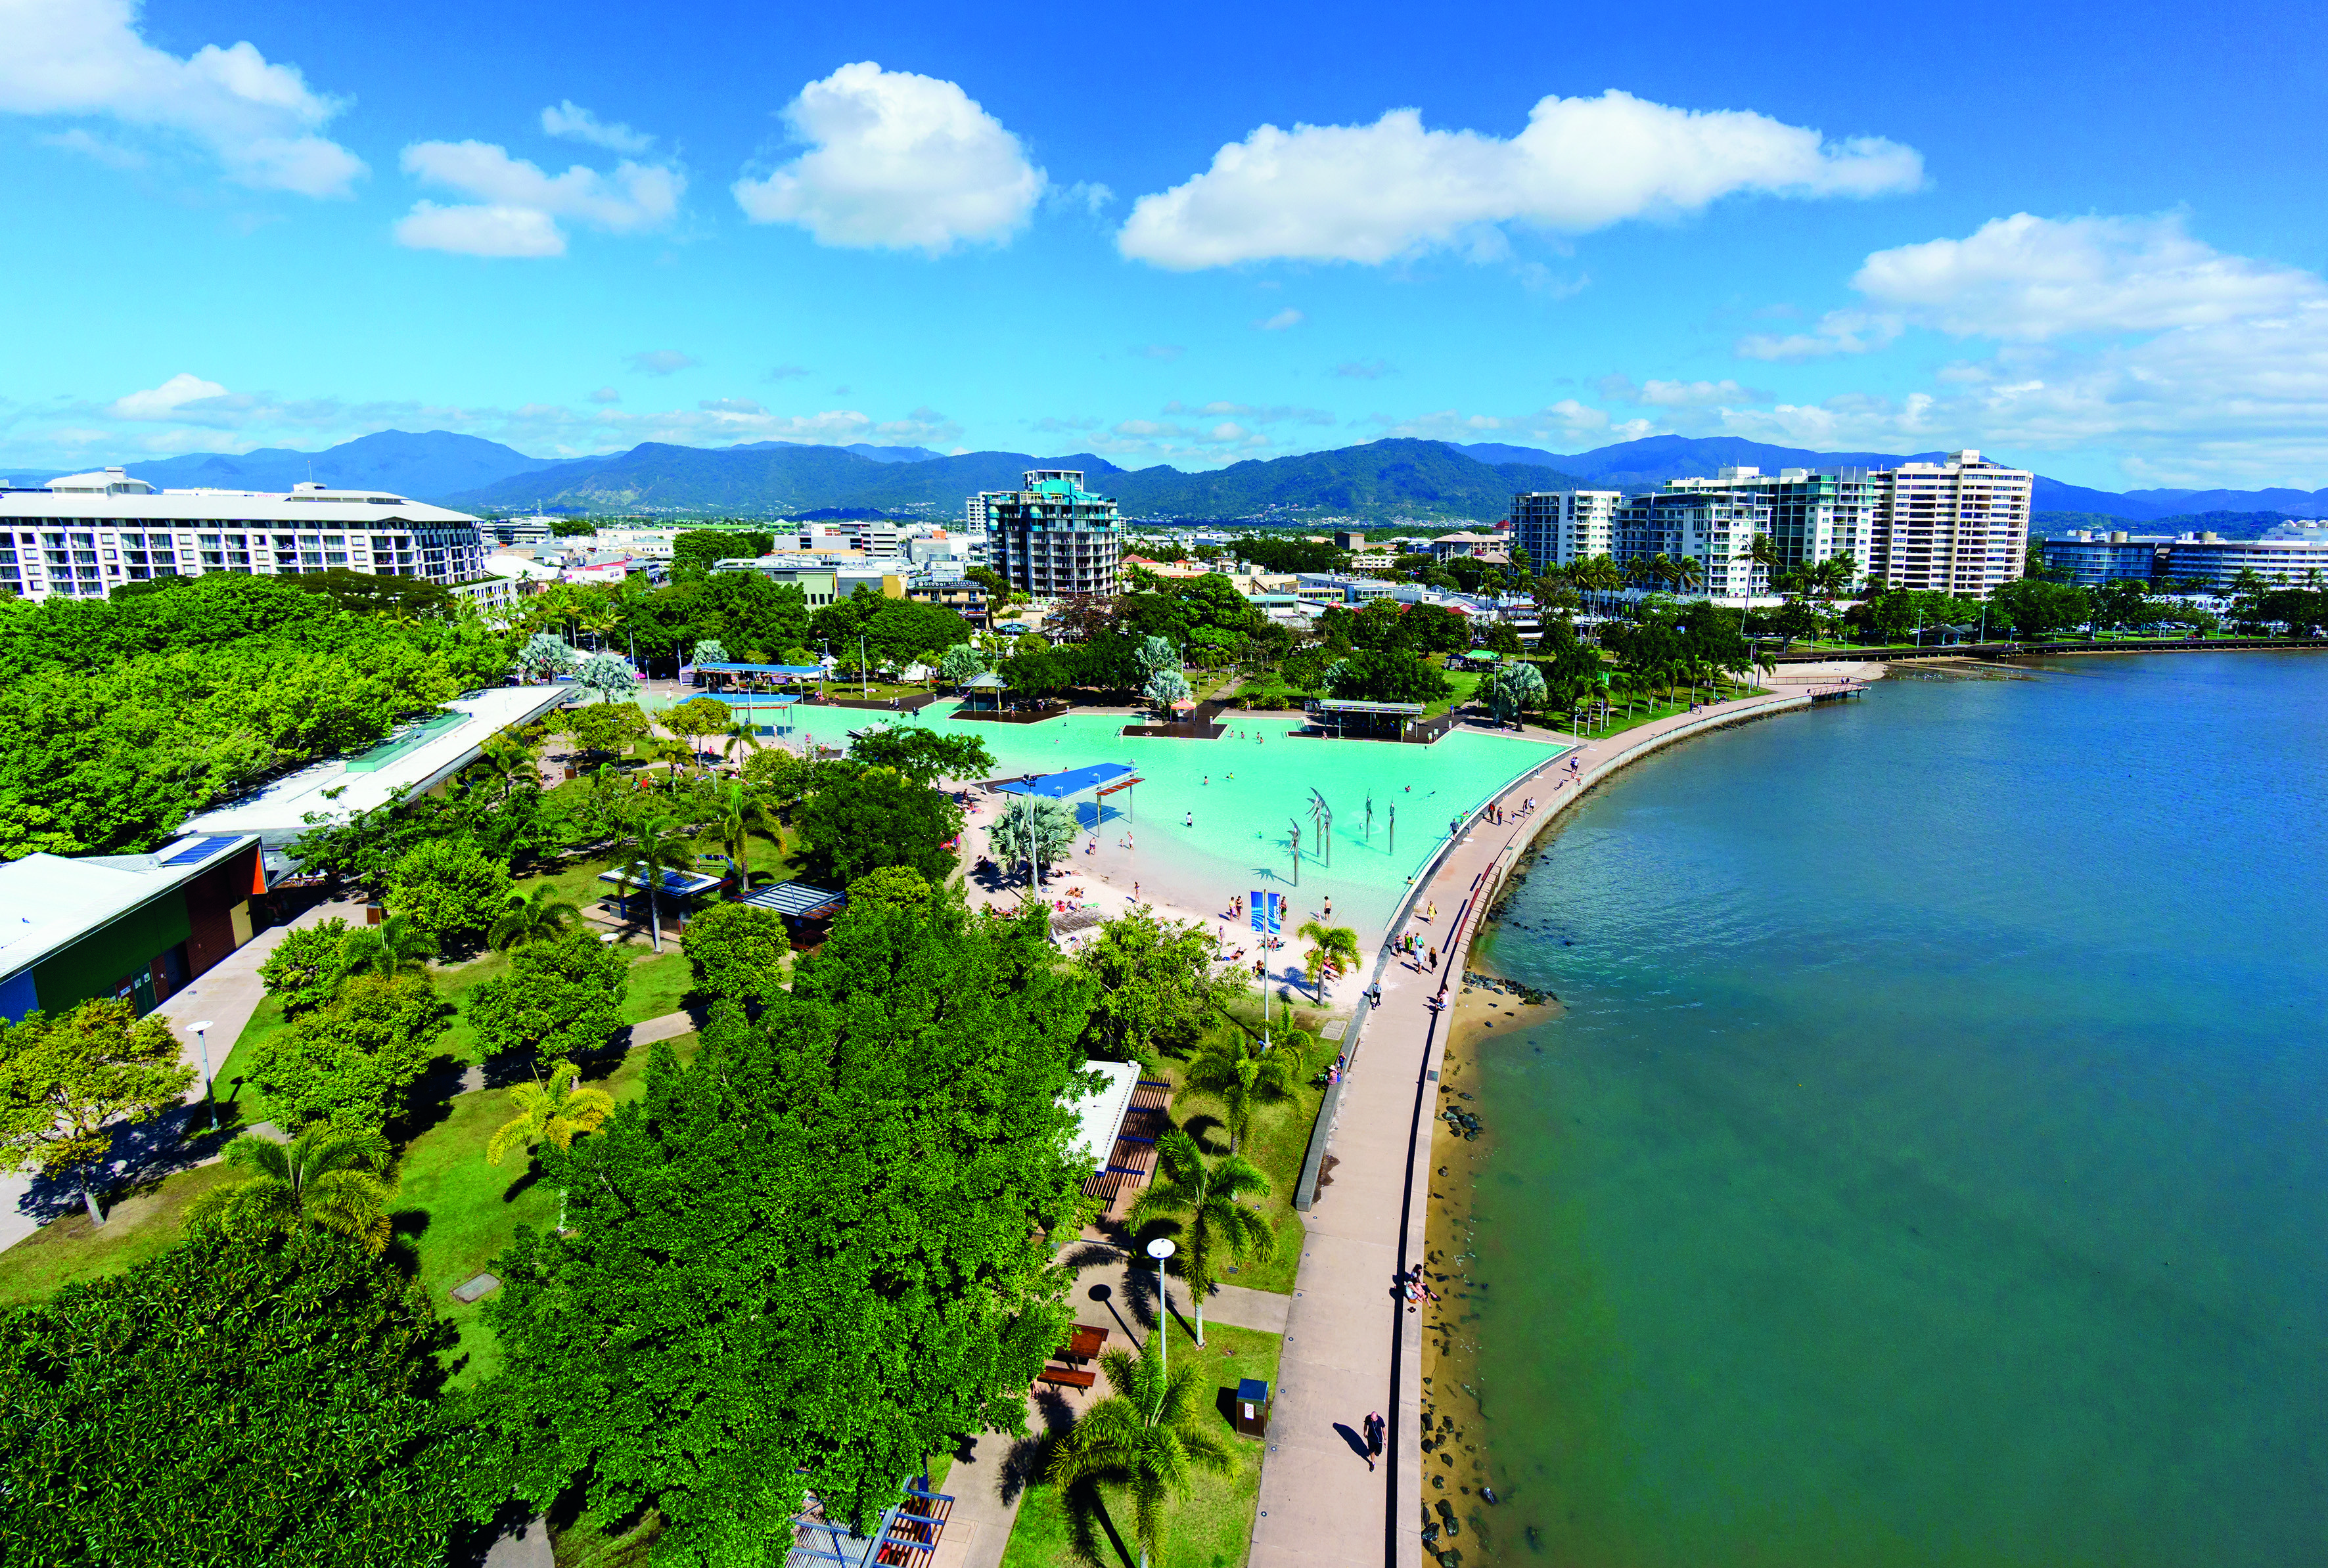 Cairns Esplanade is one of the best free things to do in Cairns